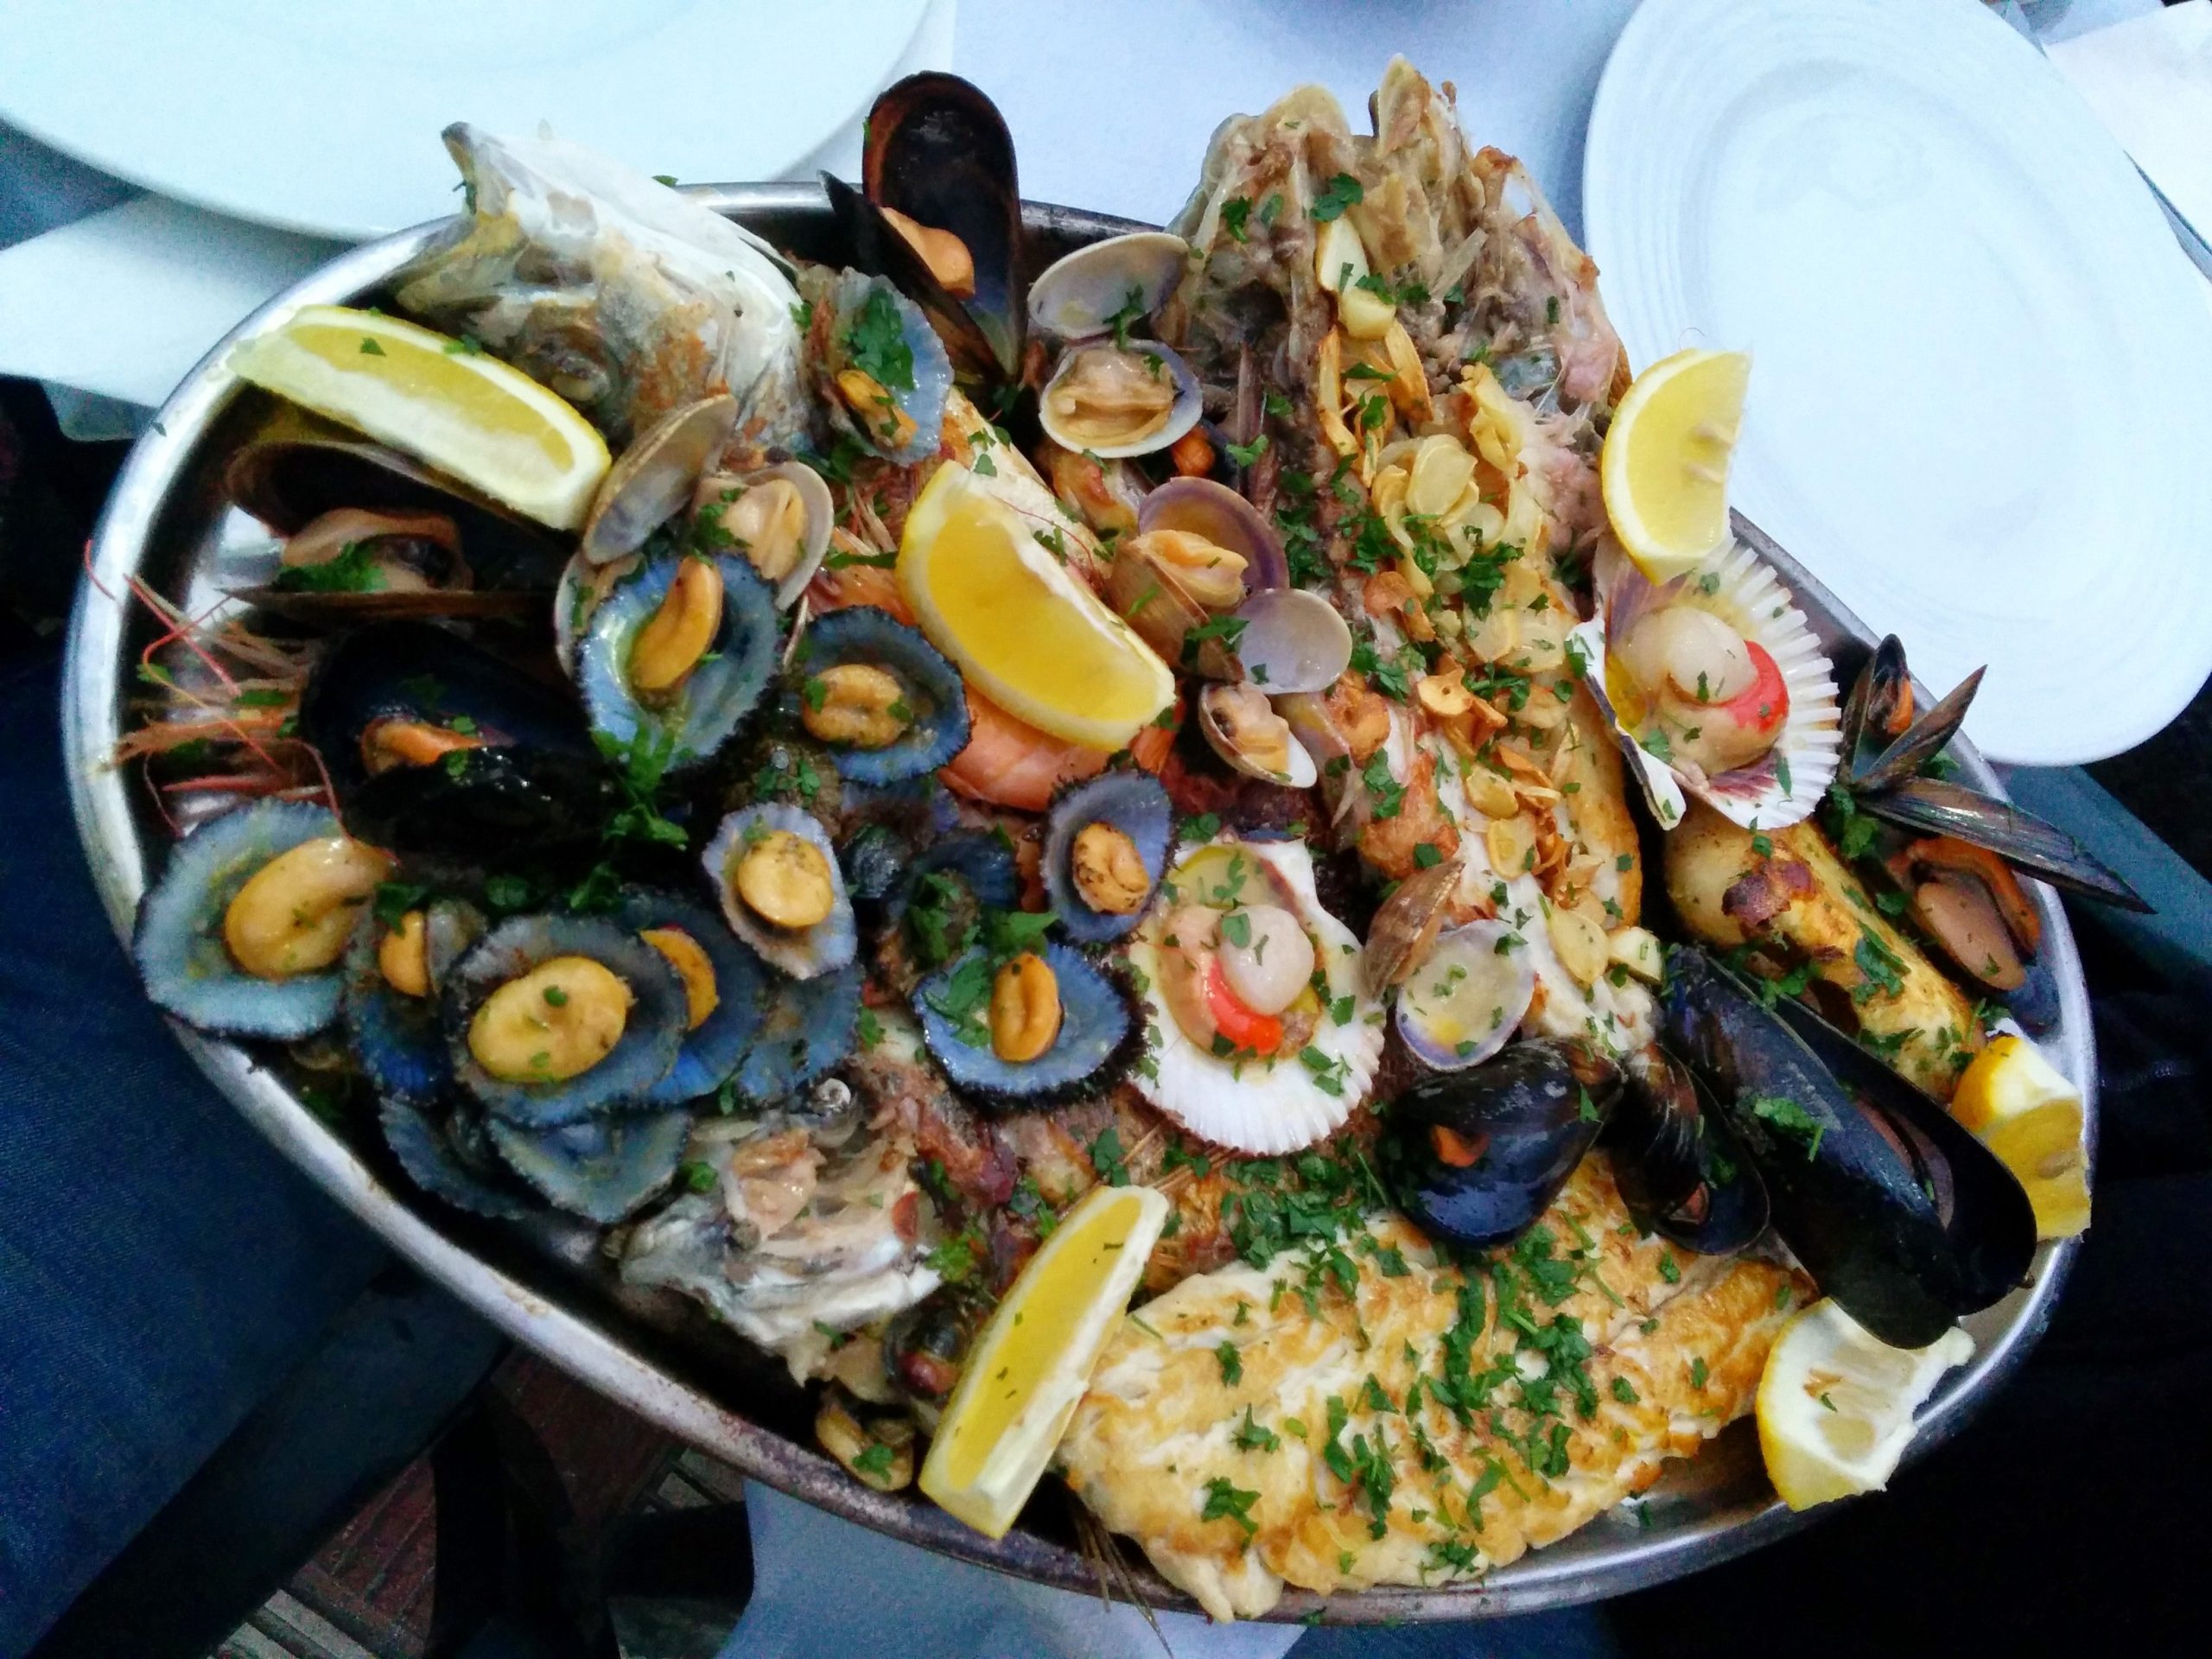 Grilled limpets as part of a large seafood platter in Madeira